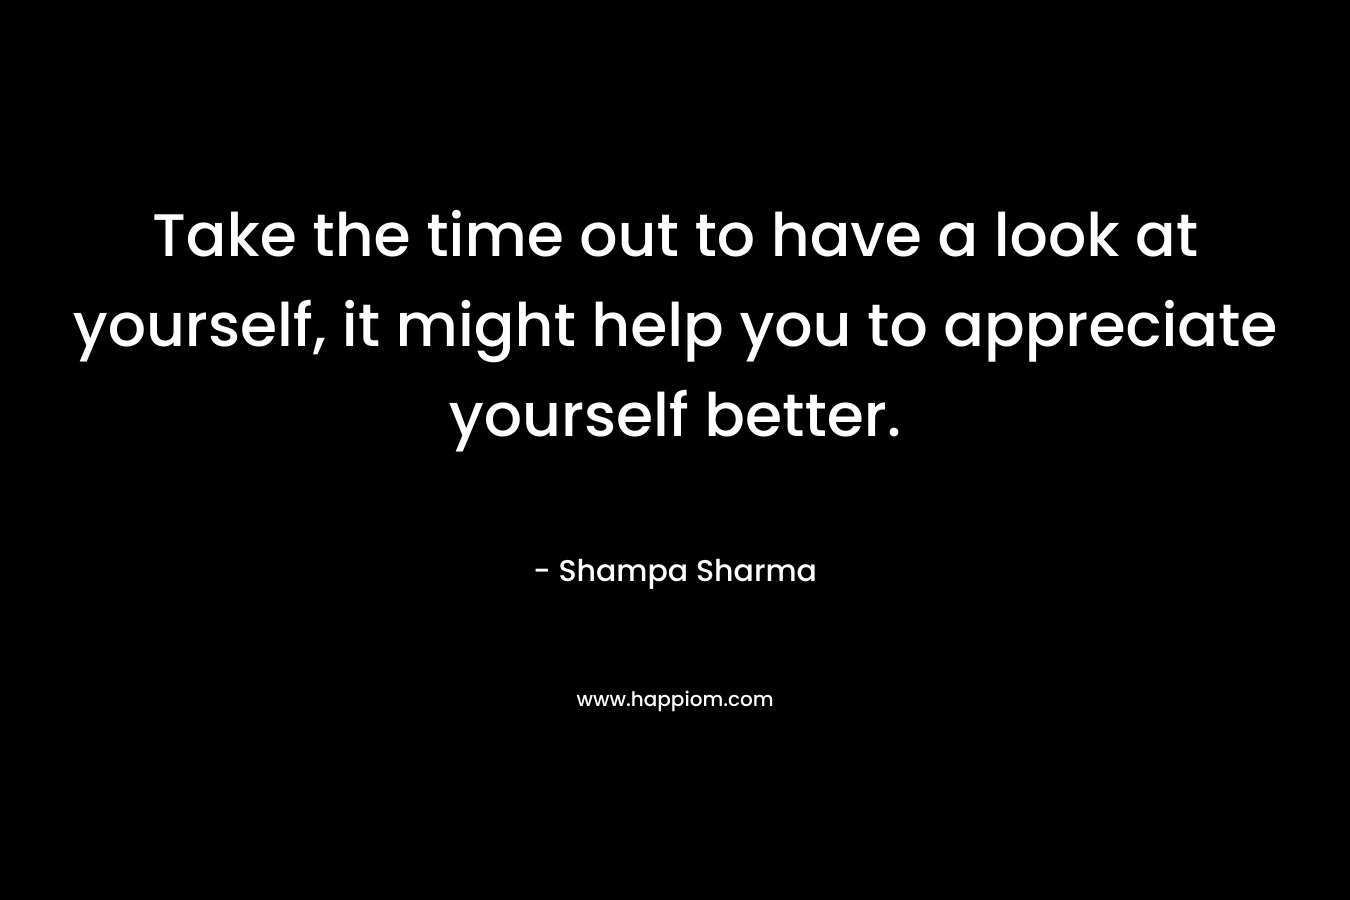 Take the time out to have a look at yourself, it might help you to appreciate yourself better. – Shampa Sharma